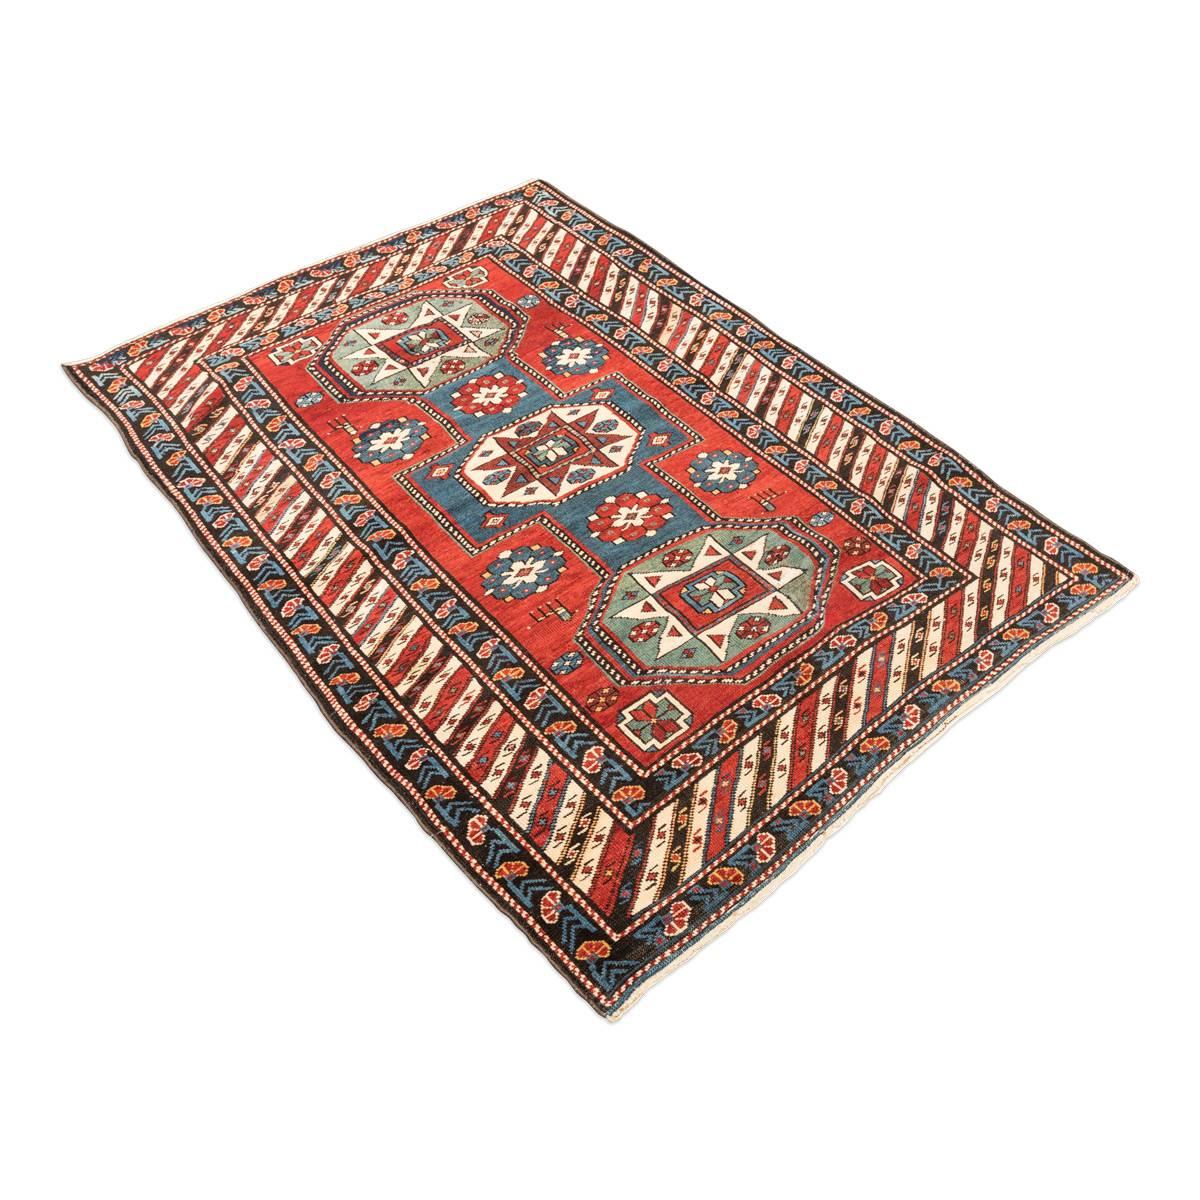 Old rug Kazak of small format. In particular it is a Caucasian Karachov.
- Highlight its geometric design and the use of greenish tones.
- Antique rug from the Caucasus region of the late 19th century.
- Design of three central medallions on a